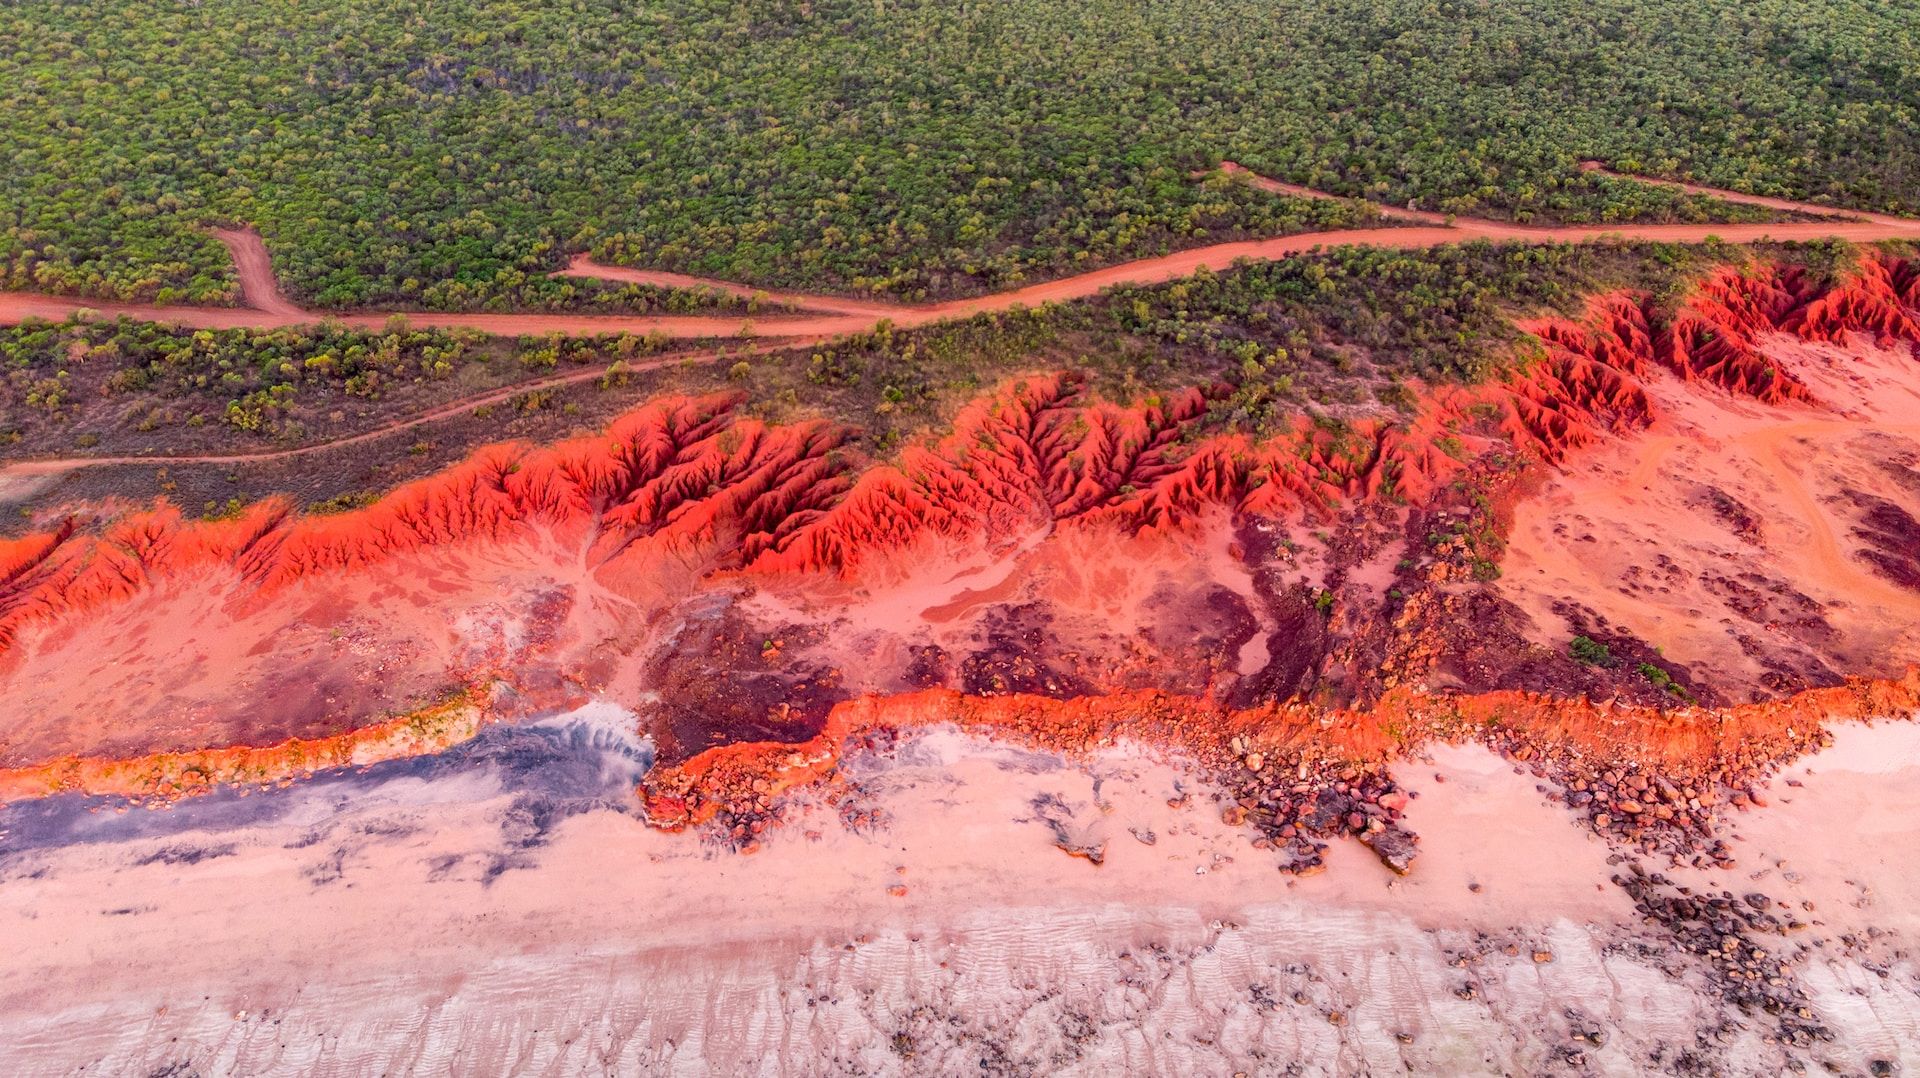 Colorful landscape of James Price Point, Broome, Western Australia